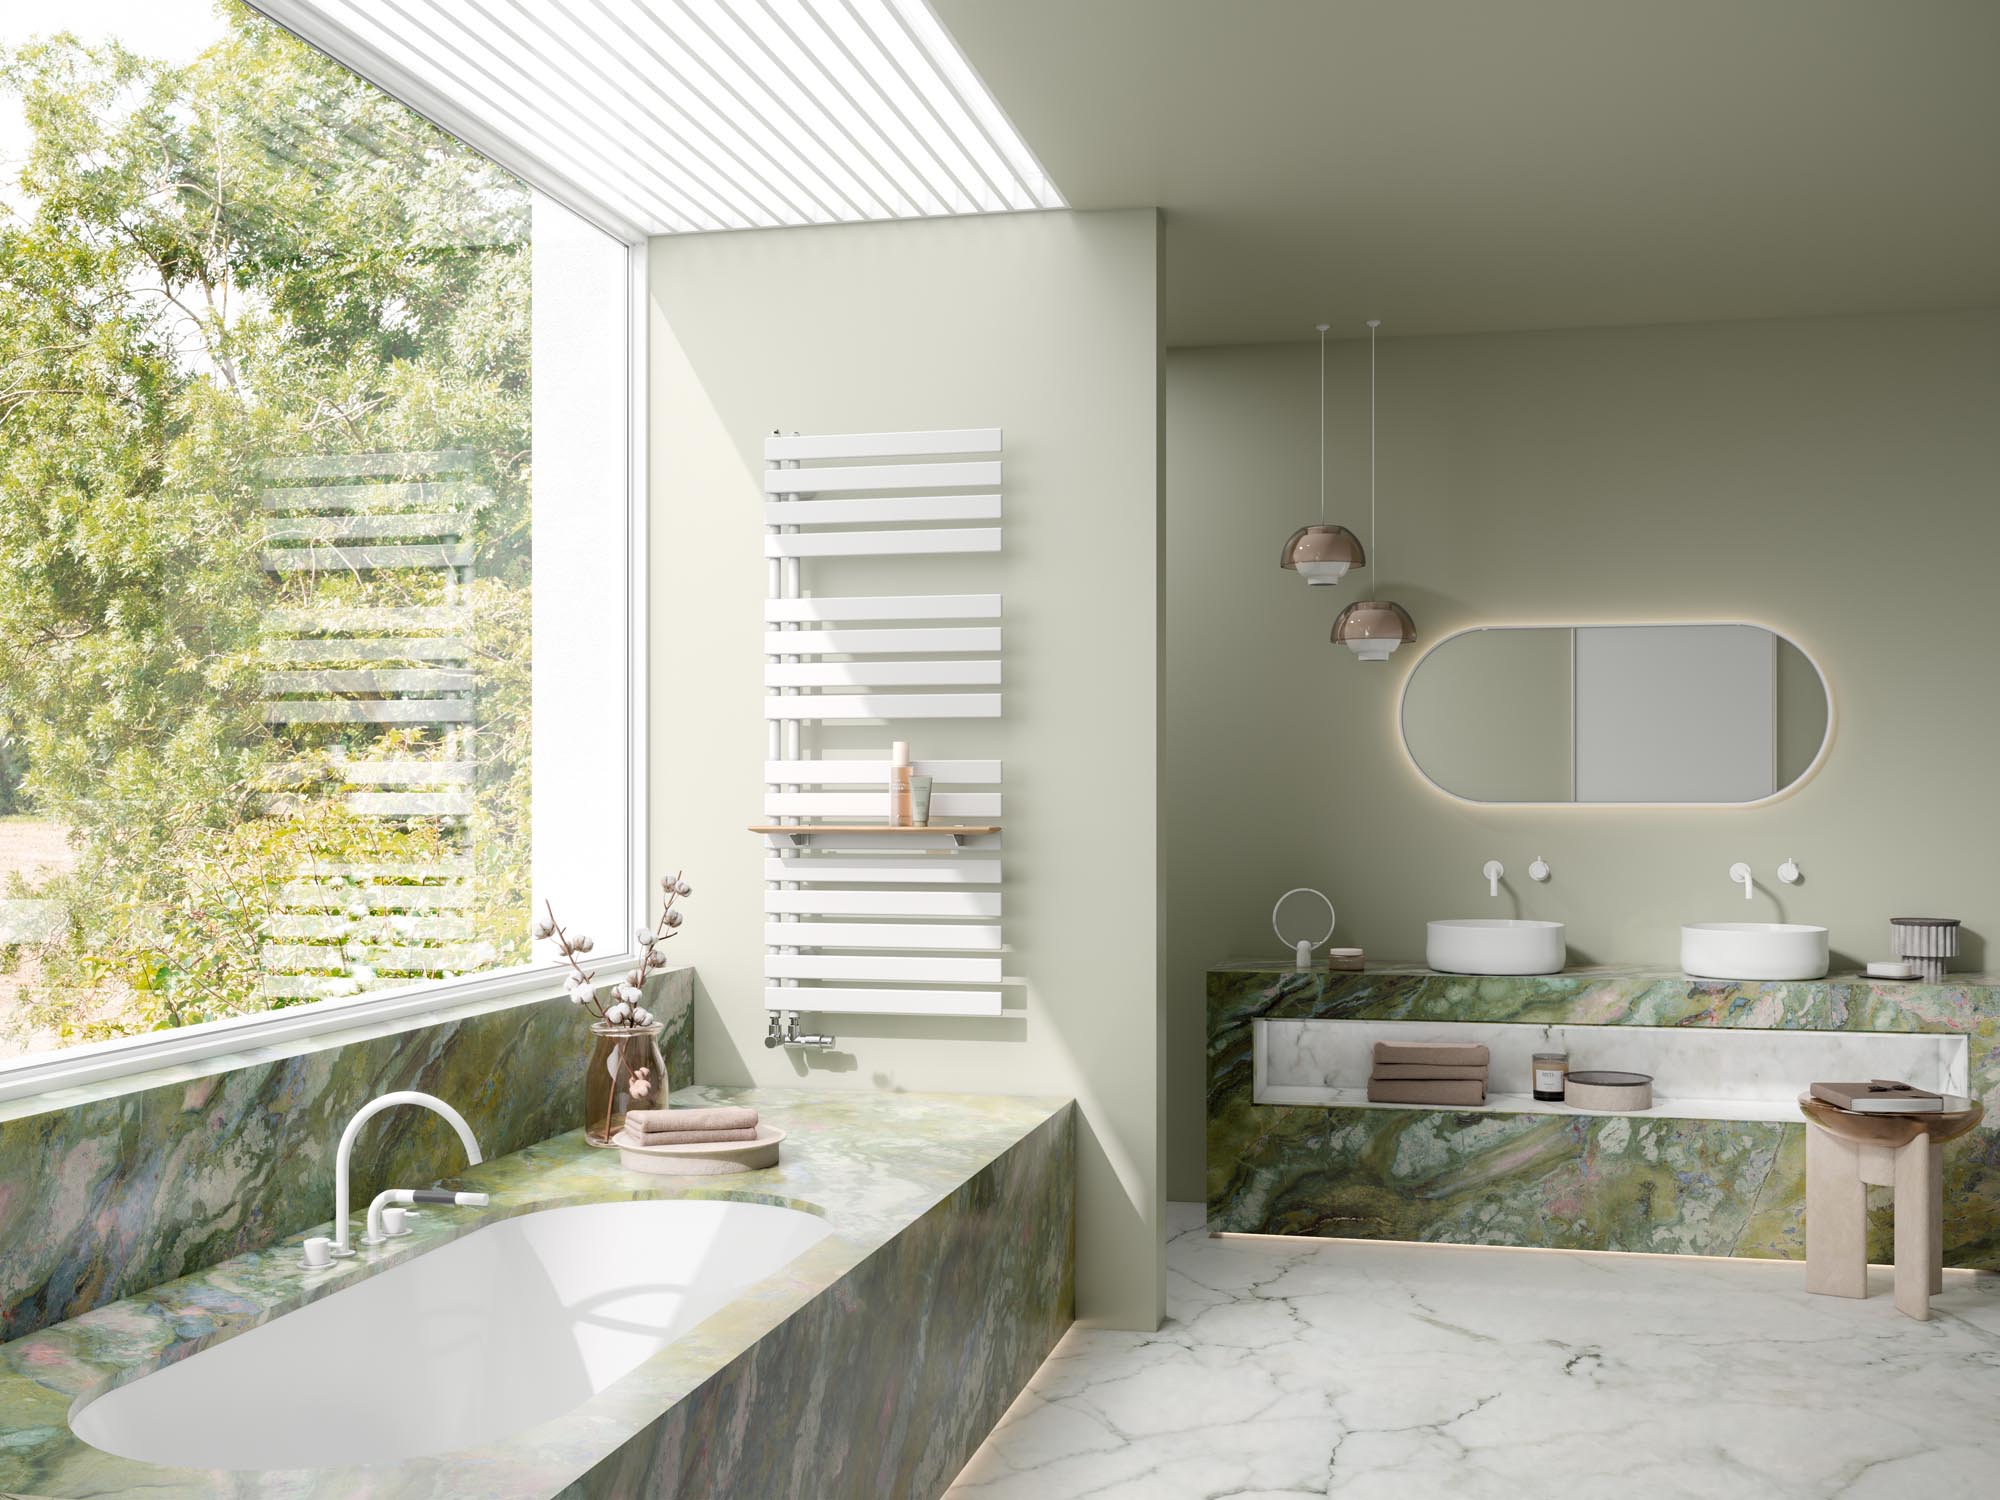 Kermi Credo Half flat design and bathroom radiators – open at the side, with flat transverse pipes.